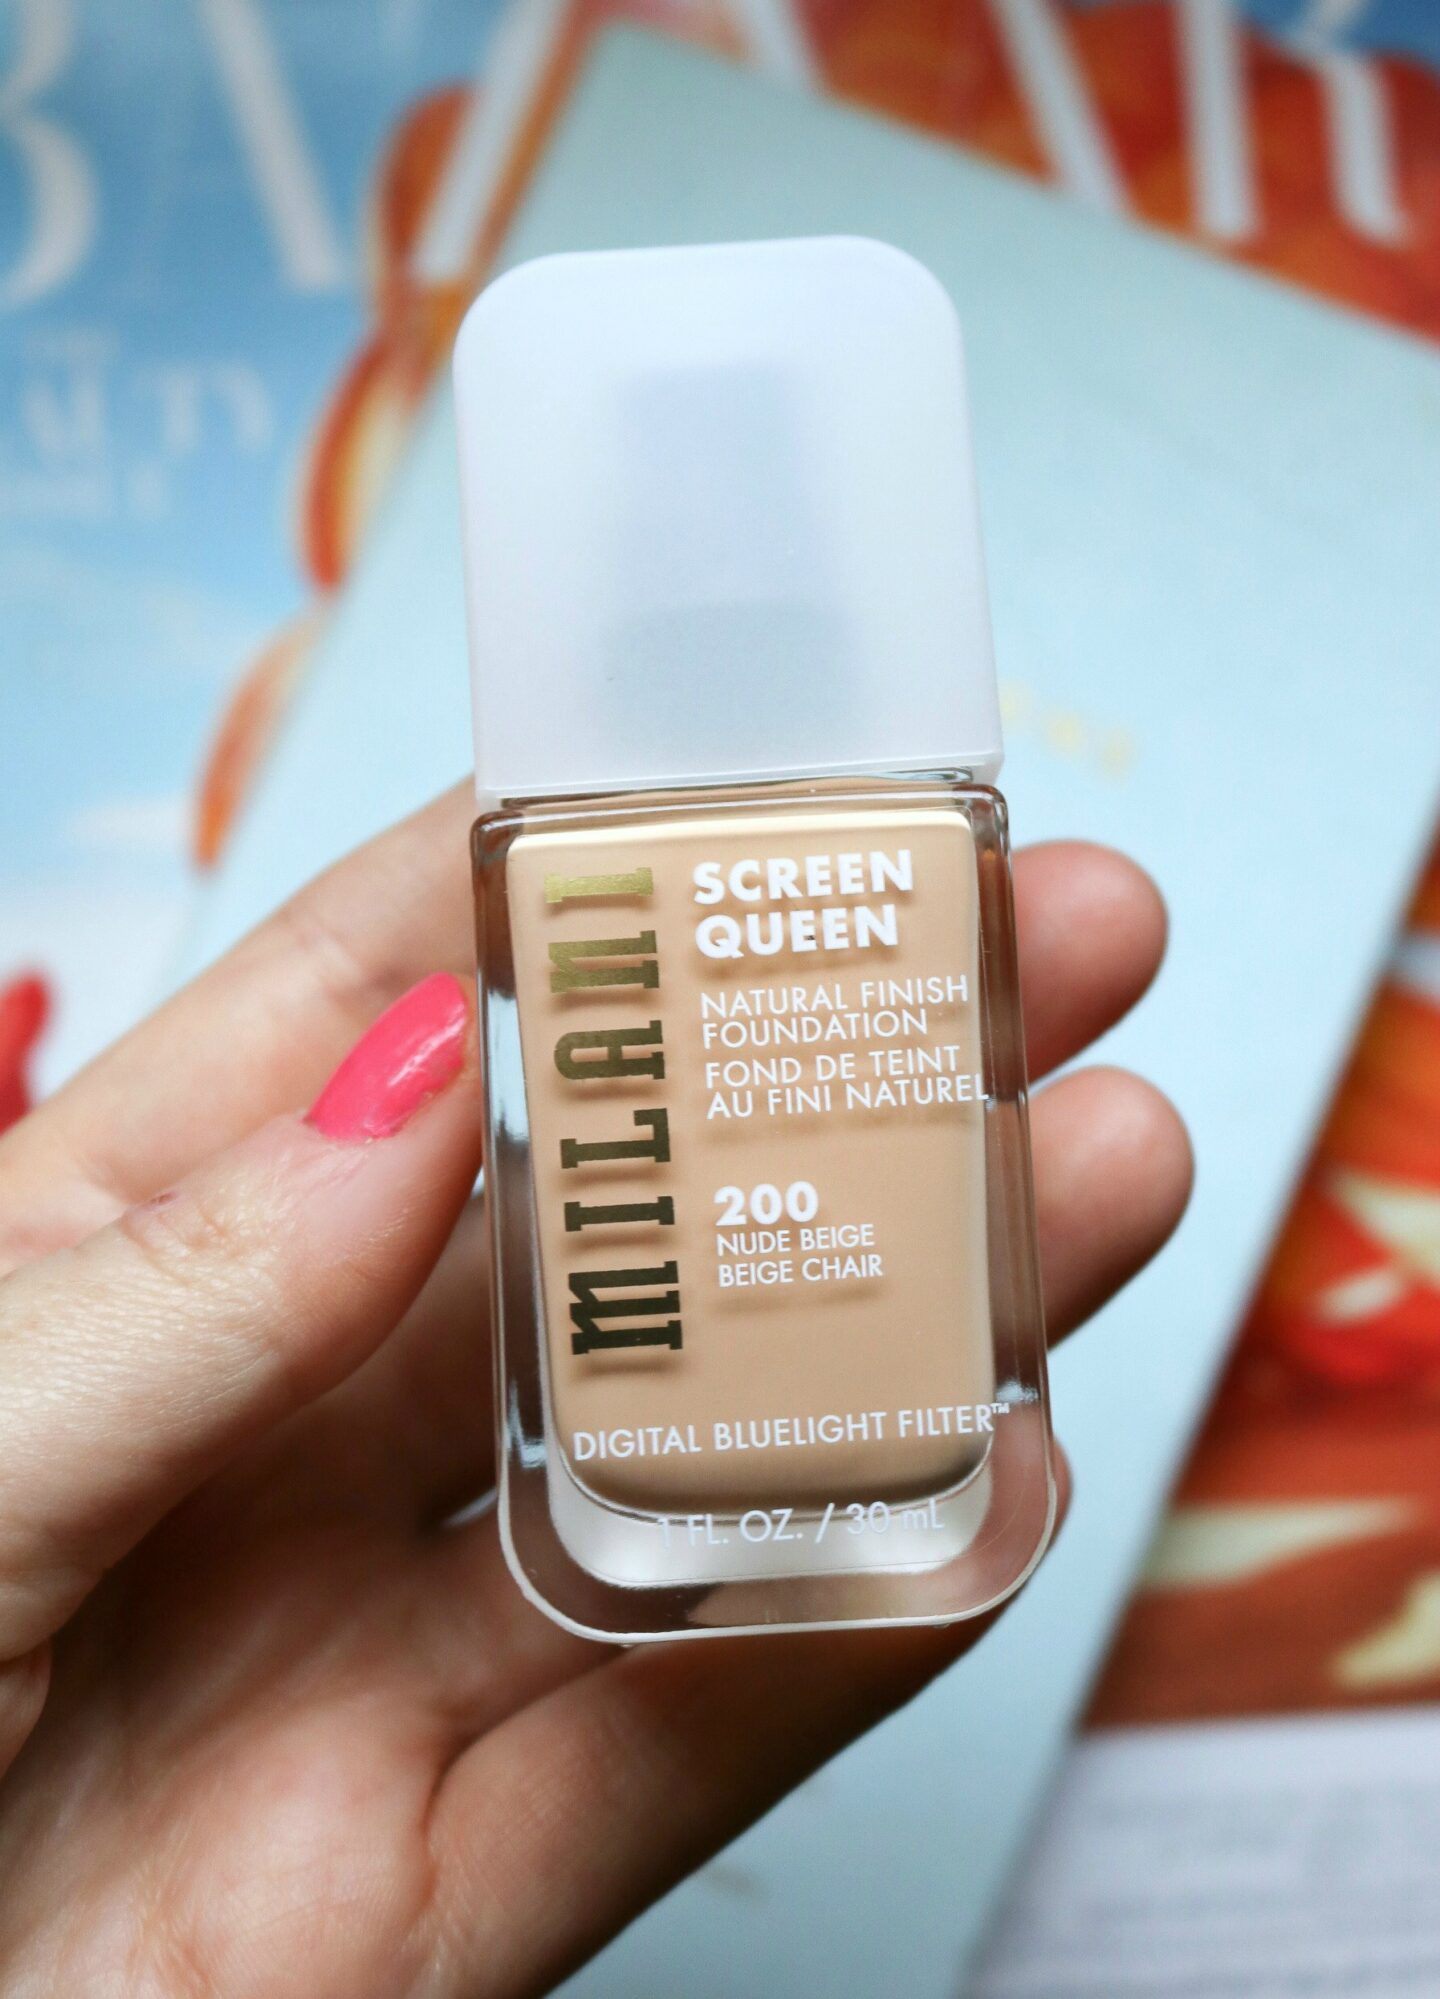 Milani Screen Queen Foundation Review I DreaminLace.com